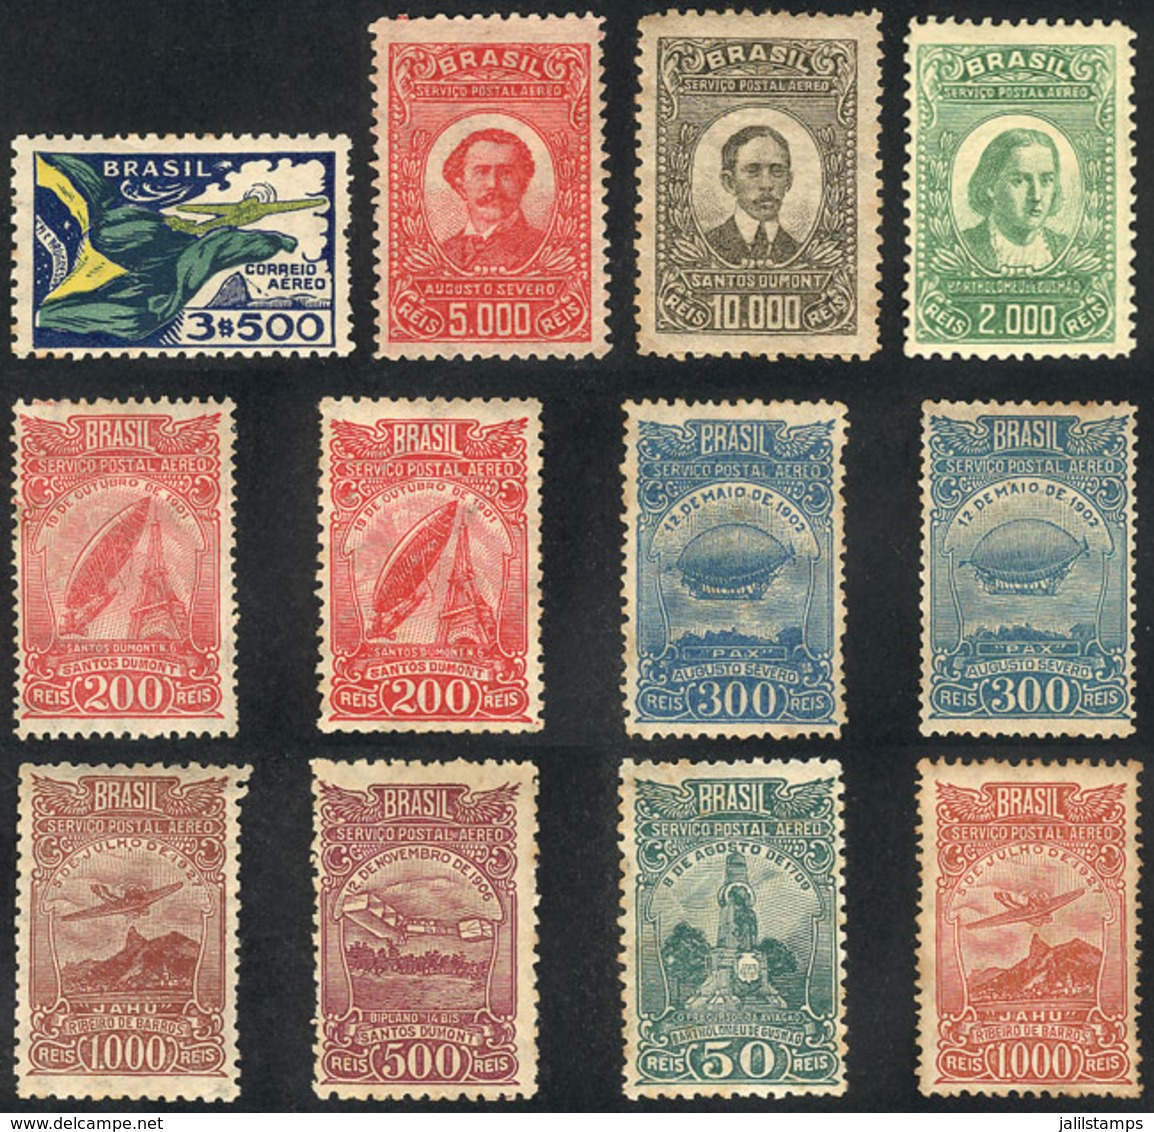 138 BRAZIL: Lot Of Interesting Stamps, Including Good Perforations And Watermarks, High RHM Catalogue Value, Good Opport - Posta Aerea